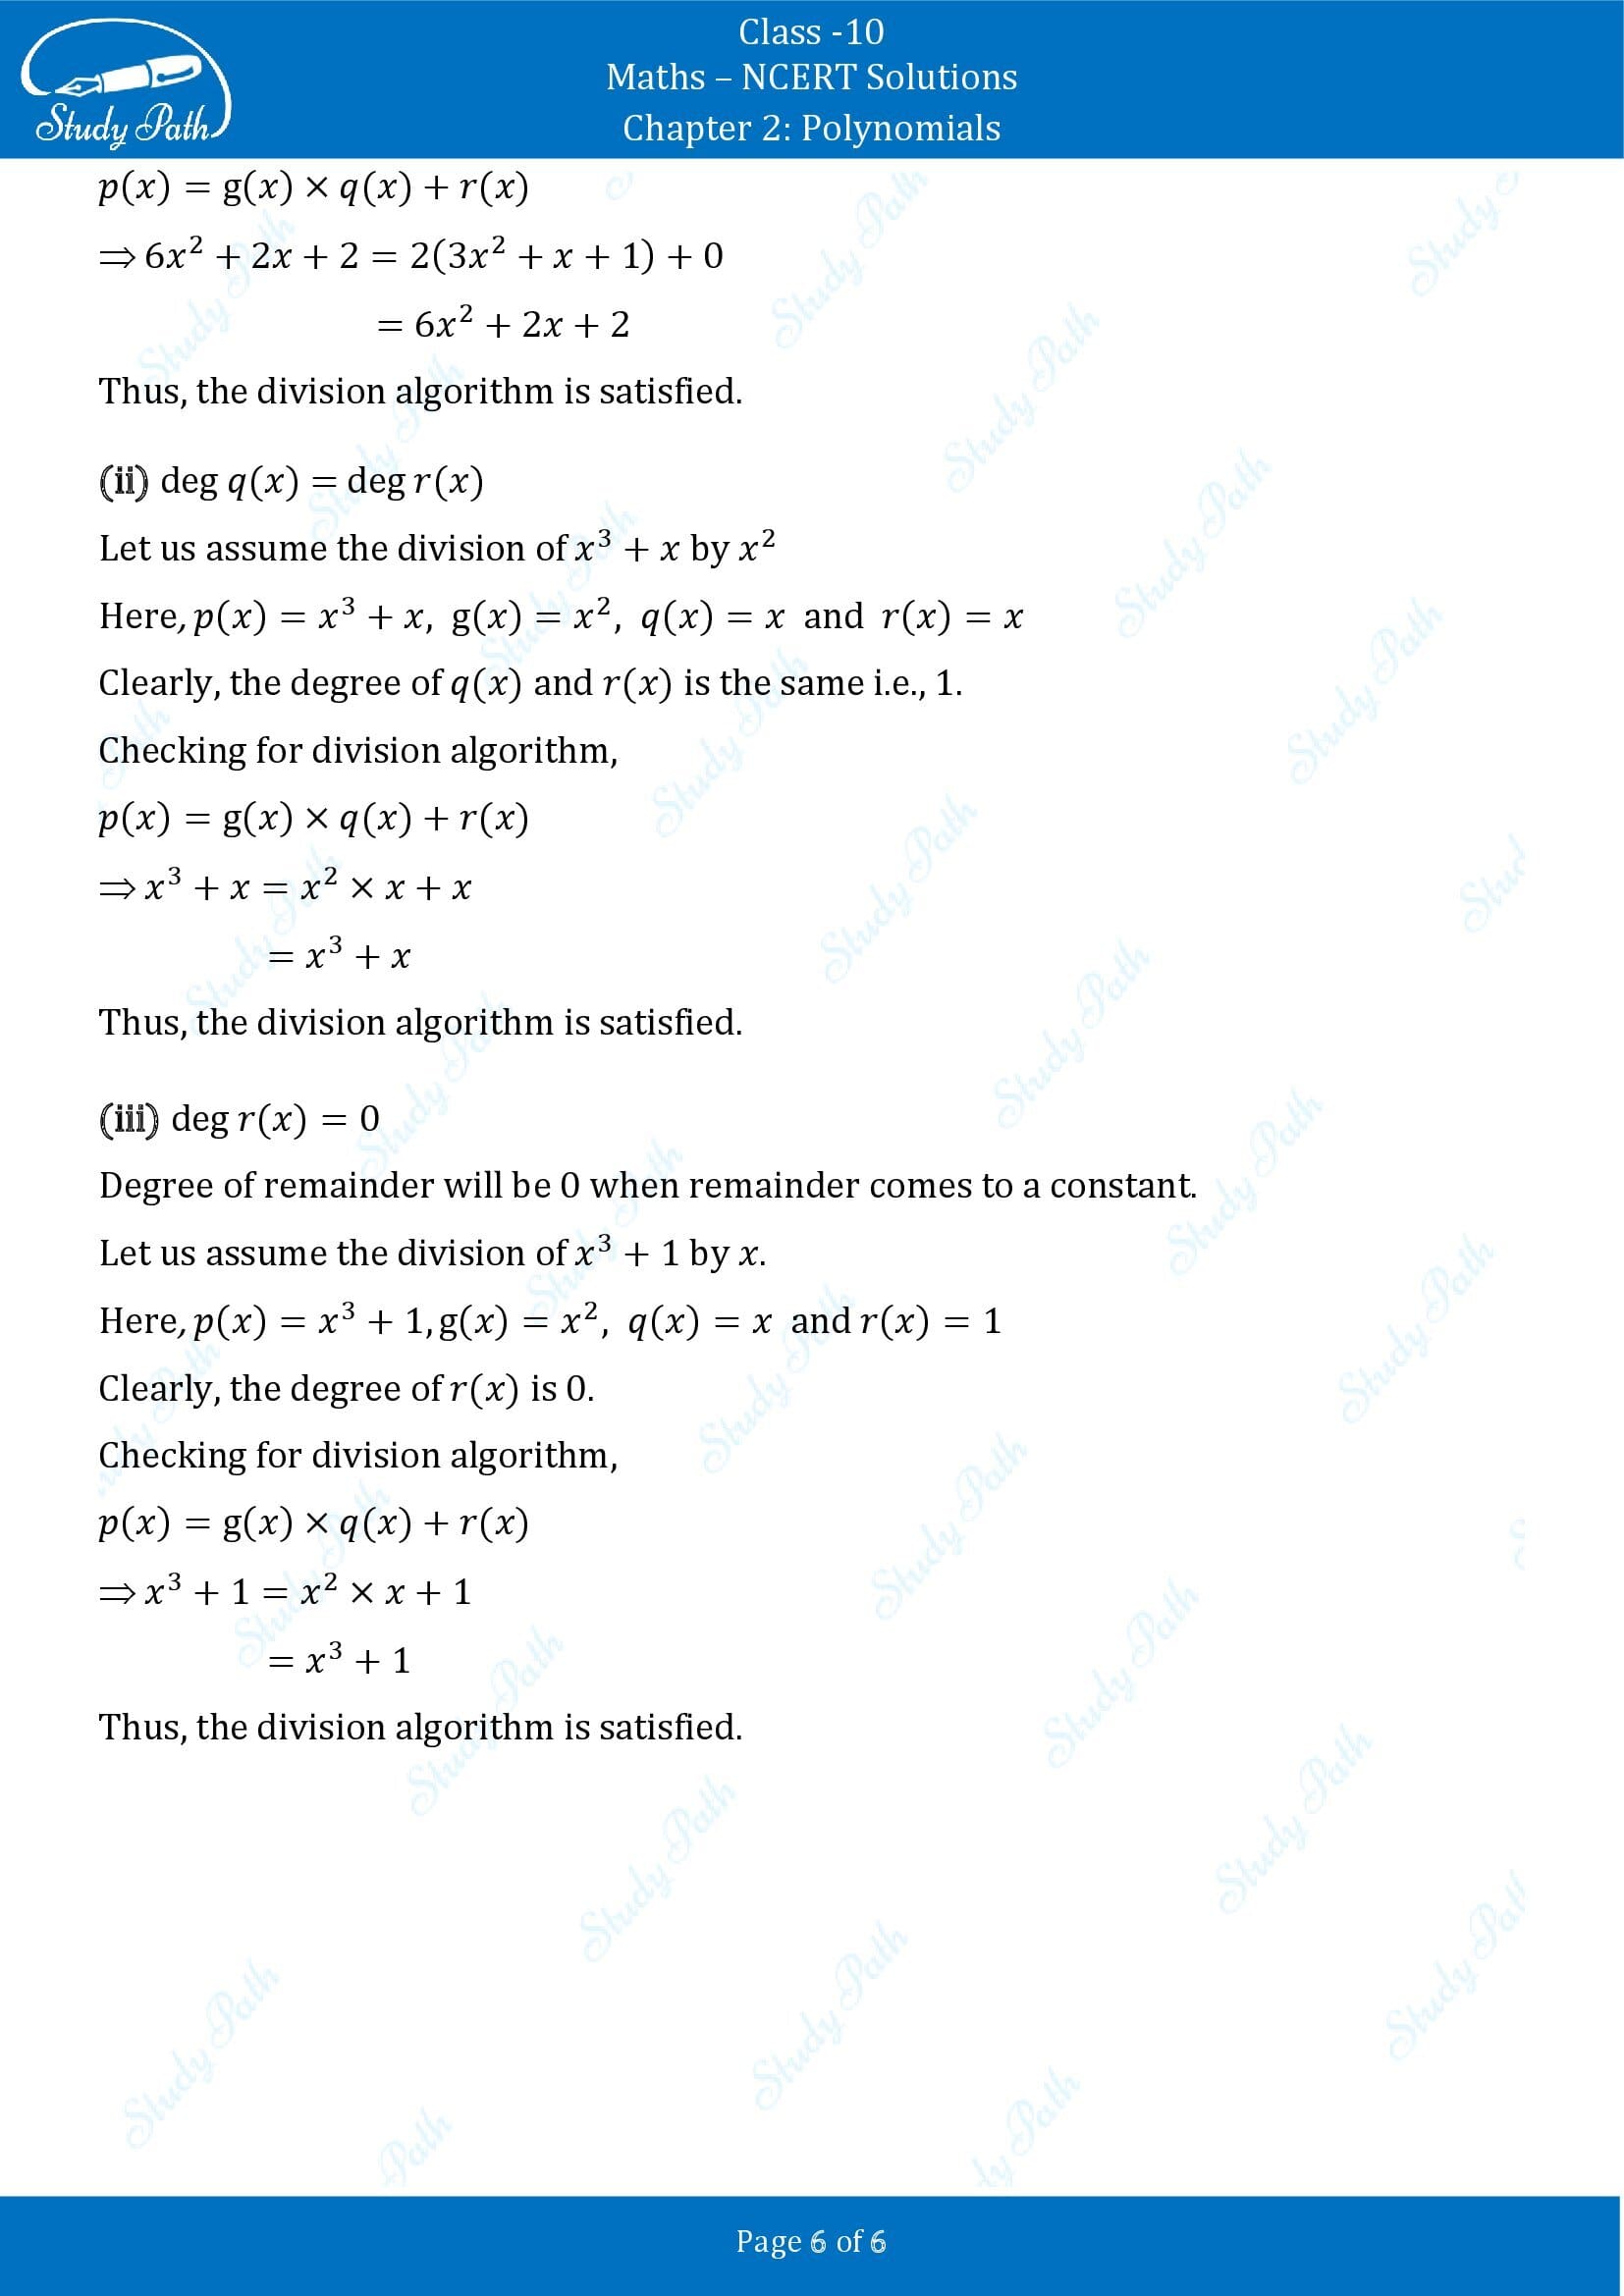 NCERT Solutions for Class 10 Maths Chapter 2 Polynomials Exercise 2.3 00006